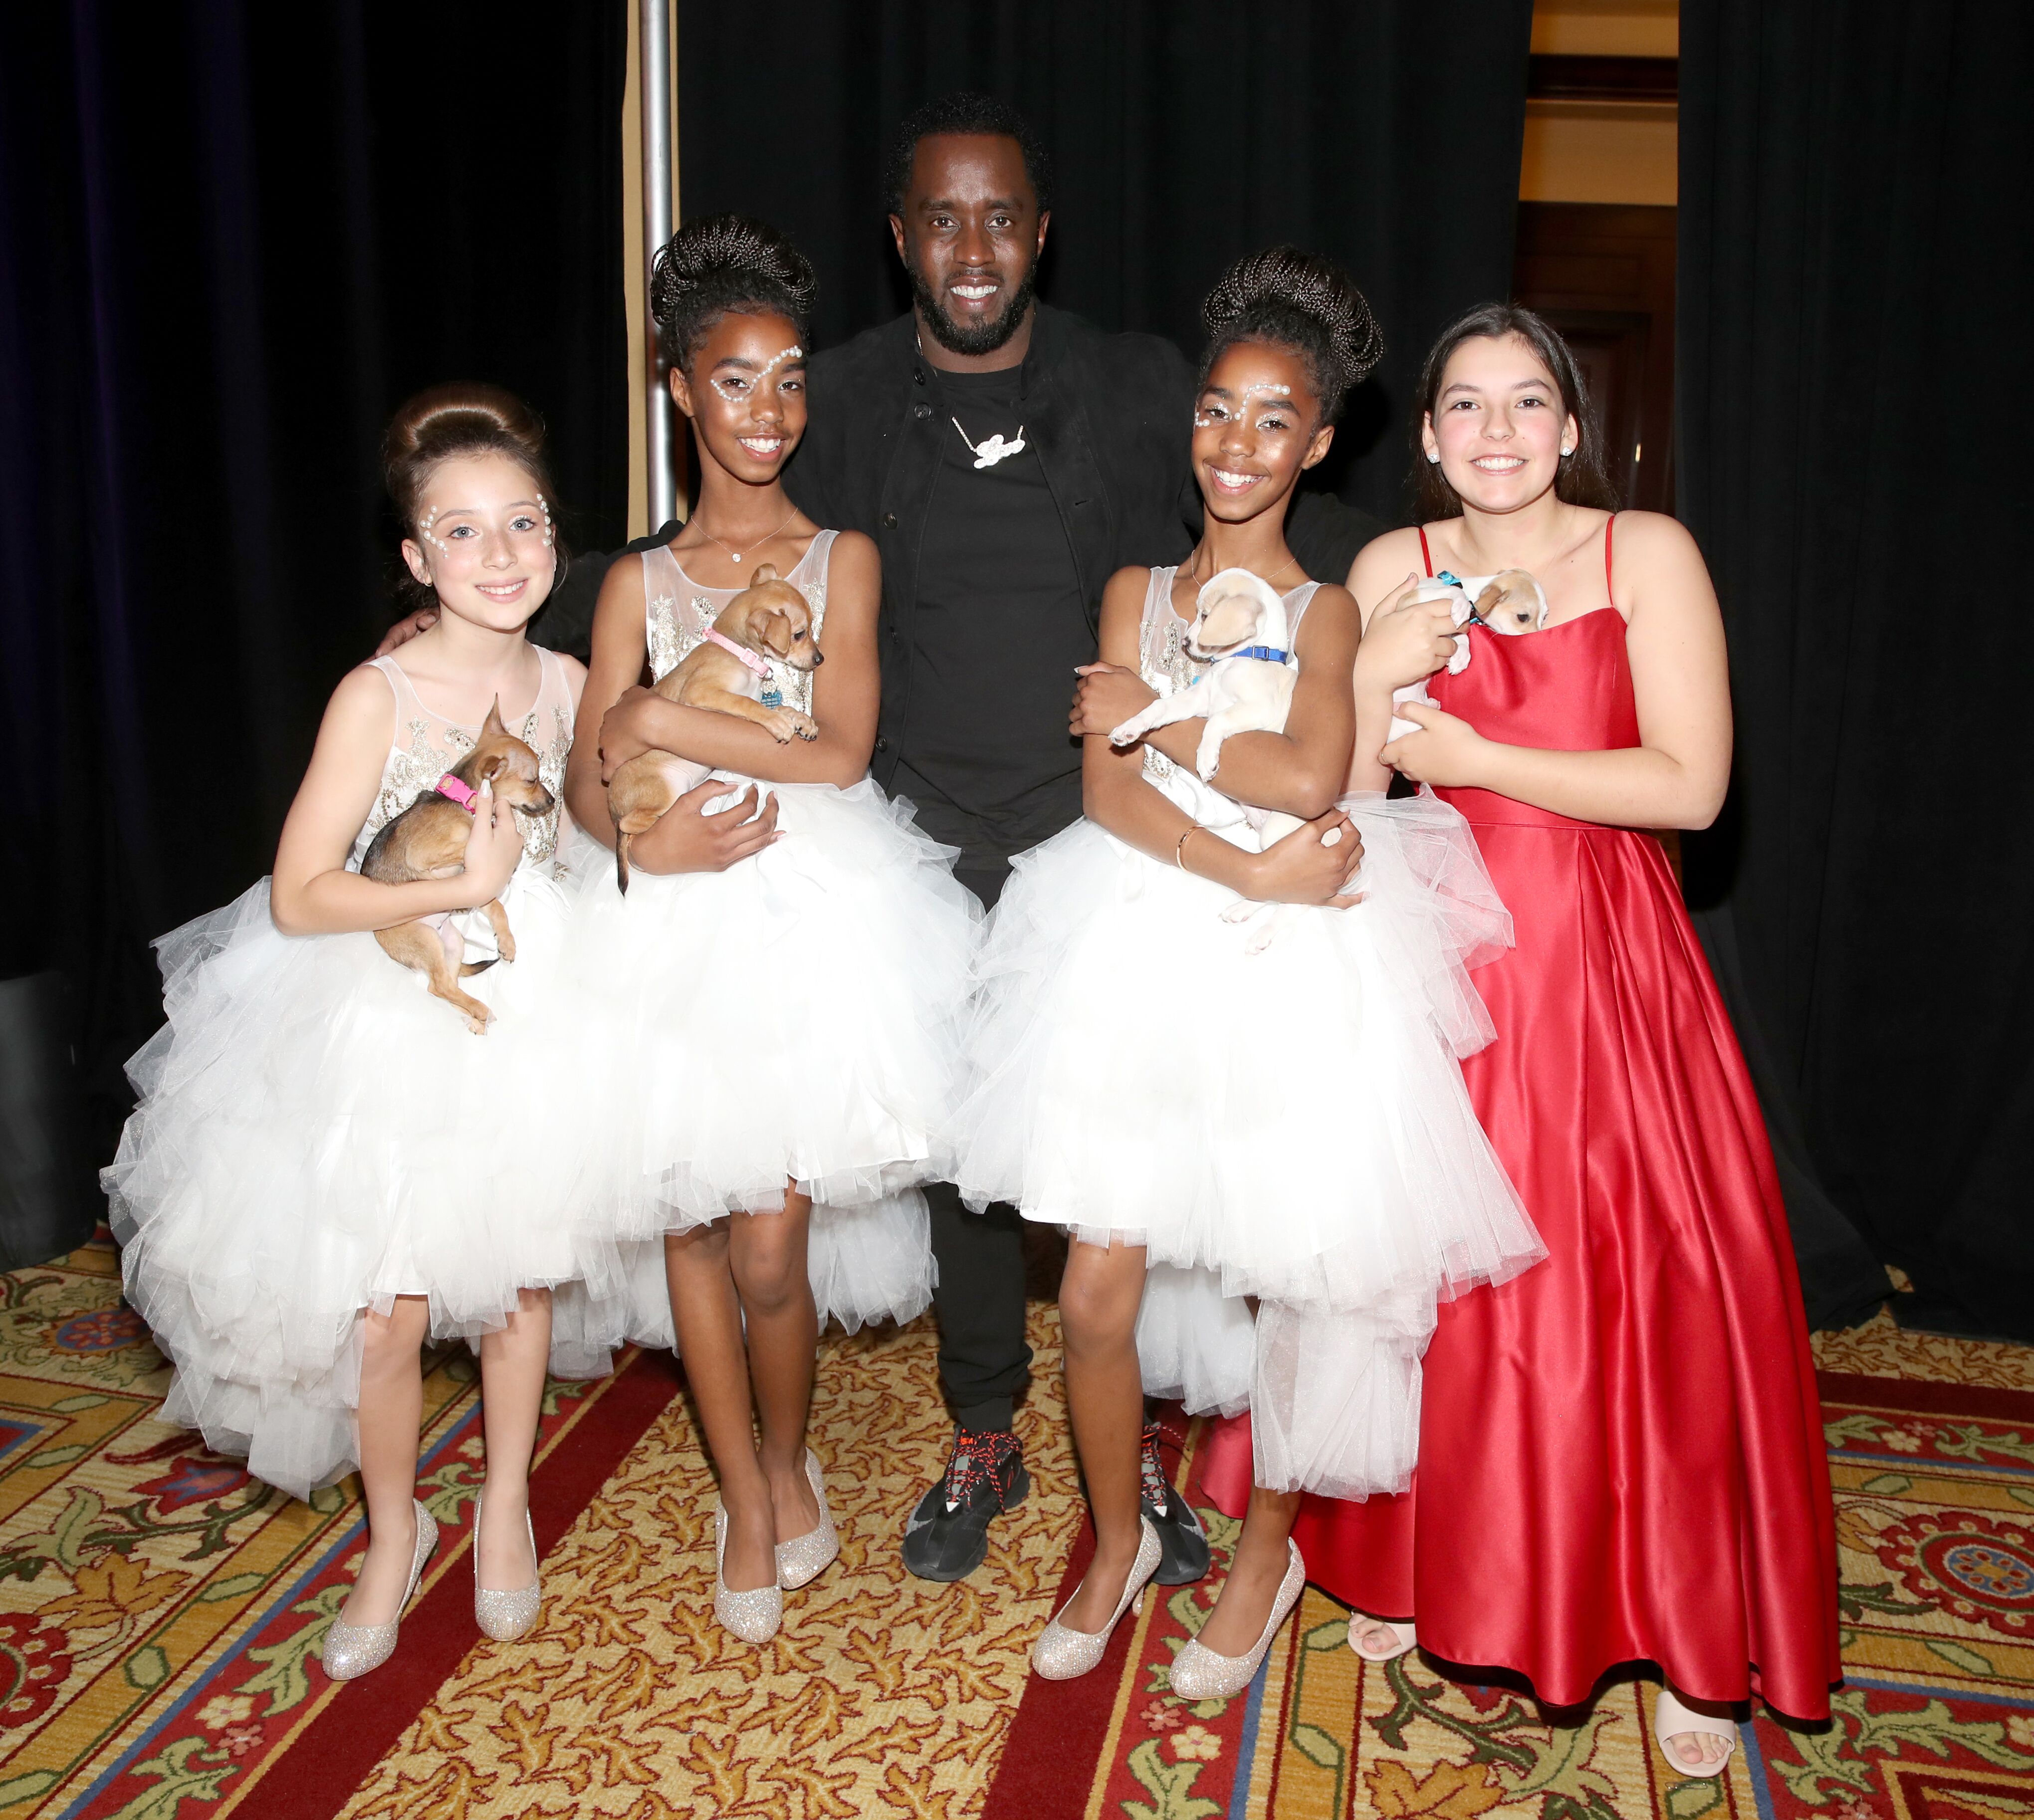 Sean "Diddy" Combs with his twins, D'Lila and Jesse at the 5th Annual Ties & Tails Gala, "Mardi Paws" in March 2019 /Source: Getty Images